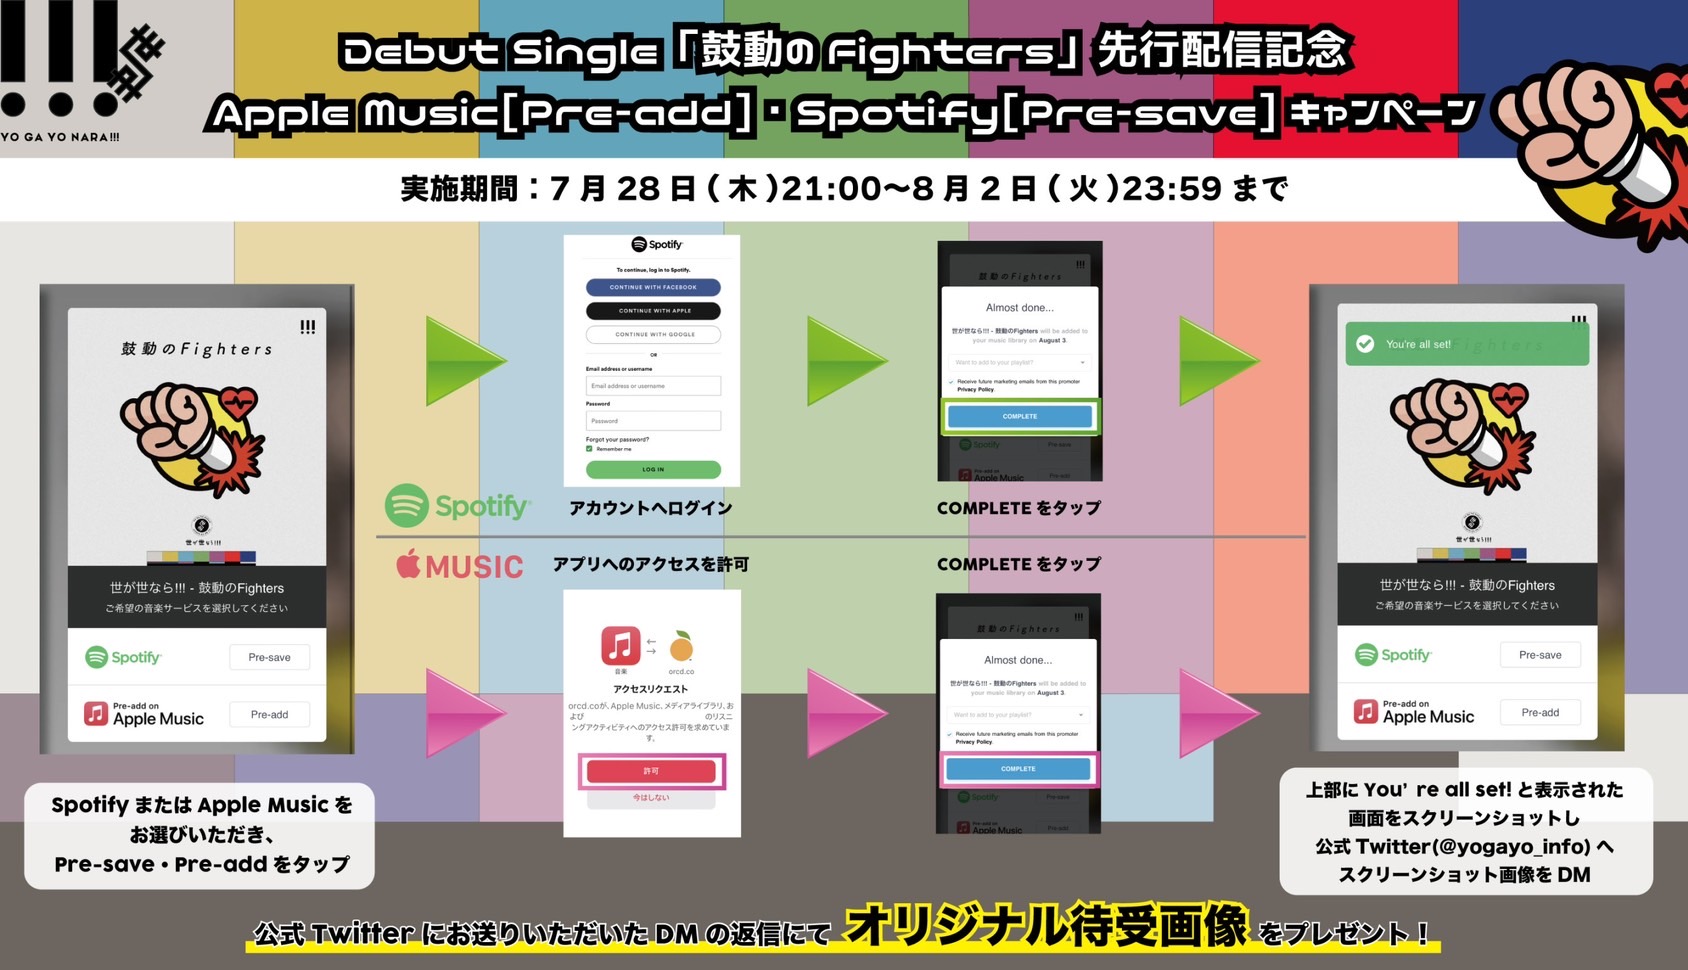 【NEWS】Debut Single「鼓動のFighters」が8月3日(水)に先行配信決定&オリジナルスマホ待ち受け画像のプレゼントキャンペーン実施！